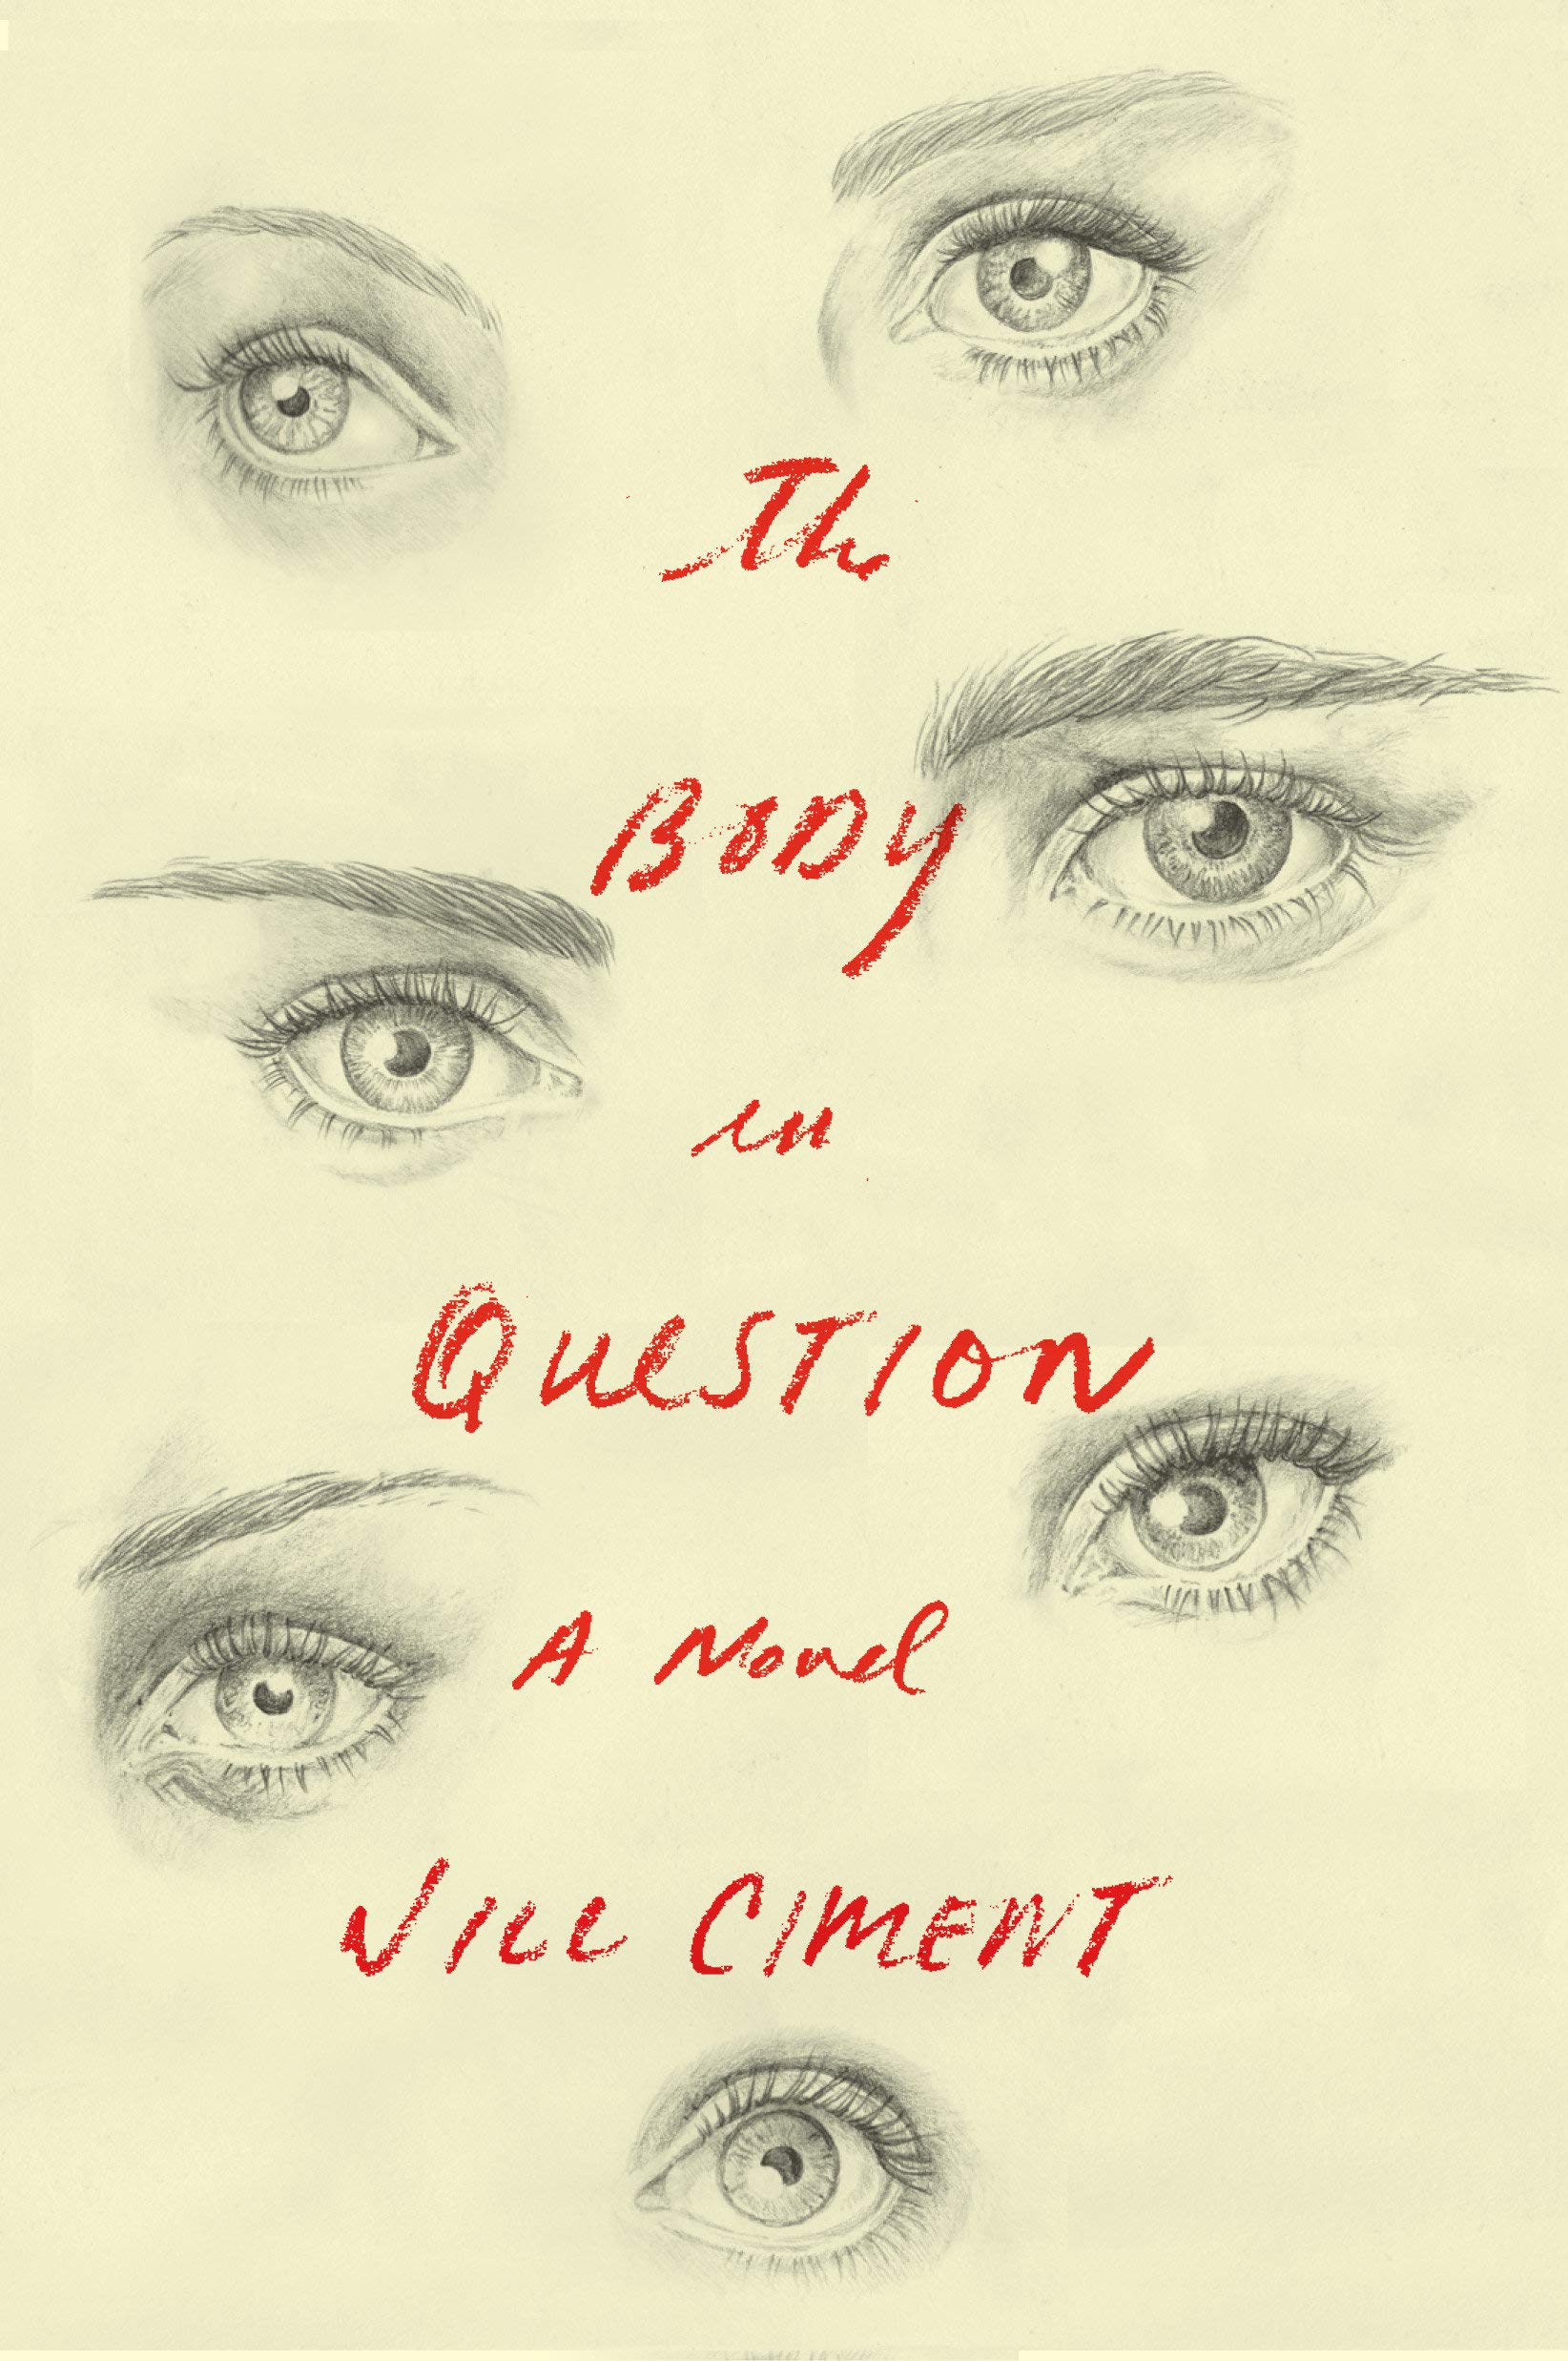 The Body in Question Book